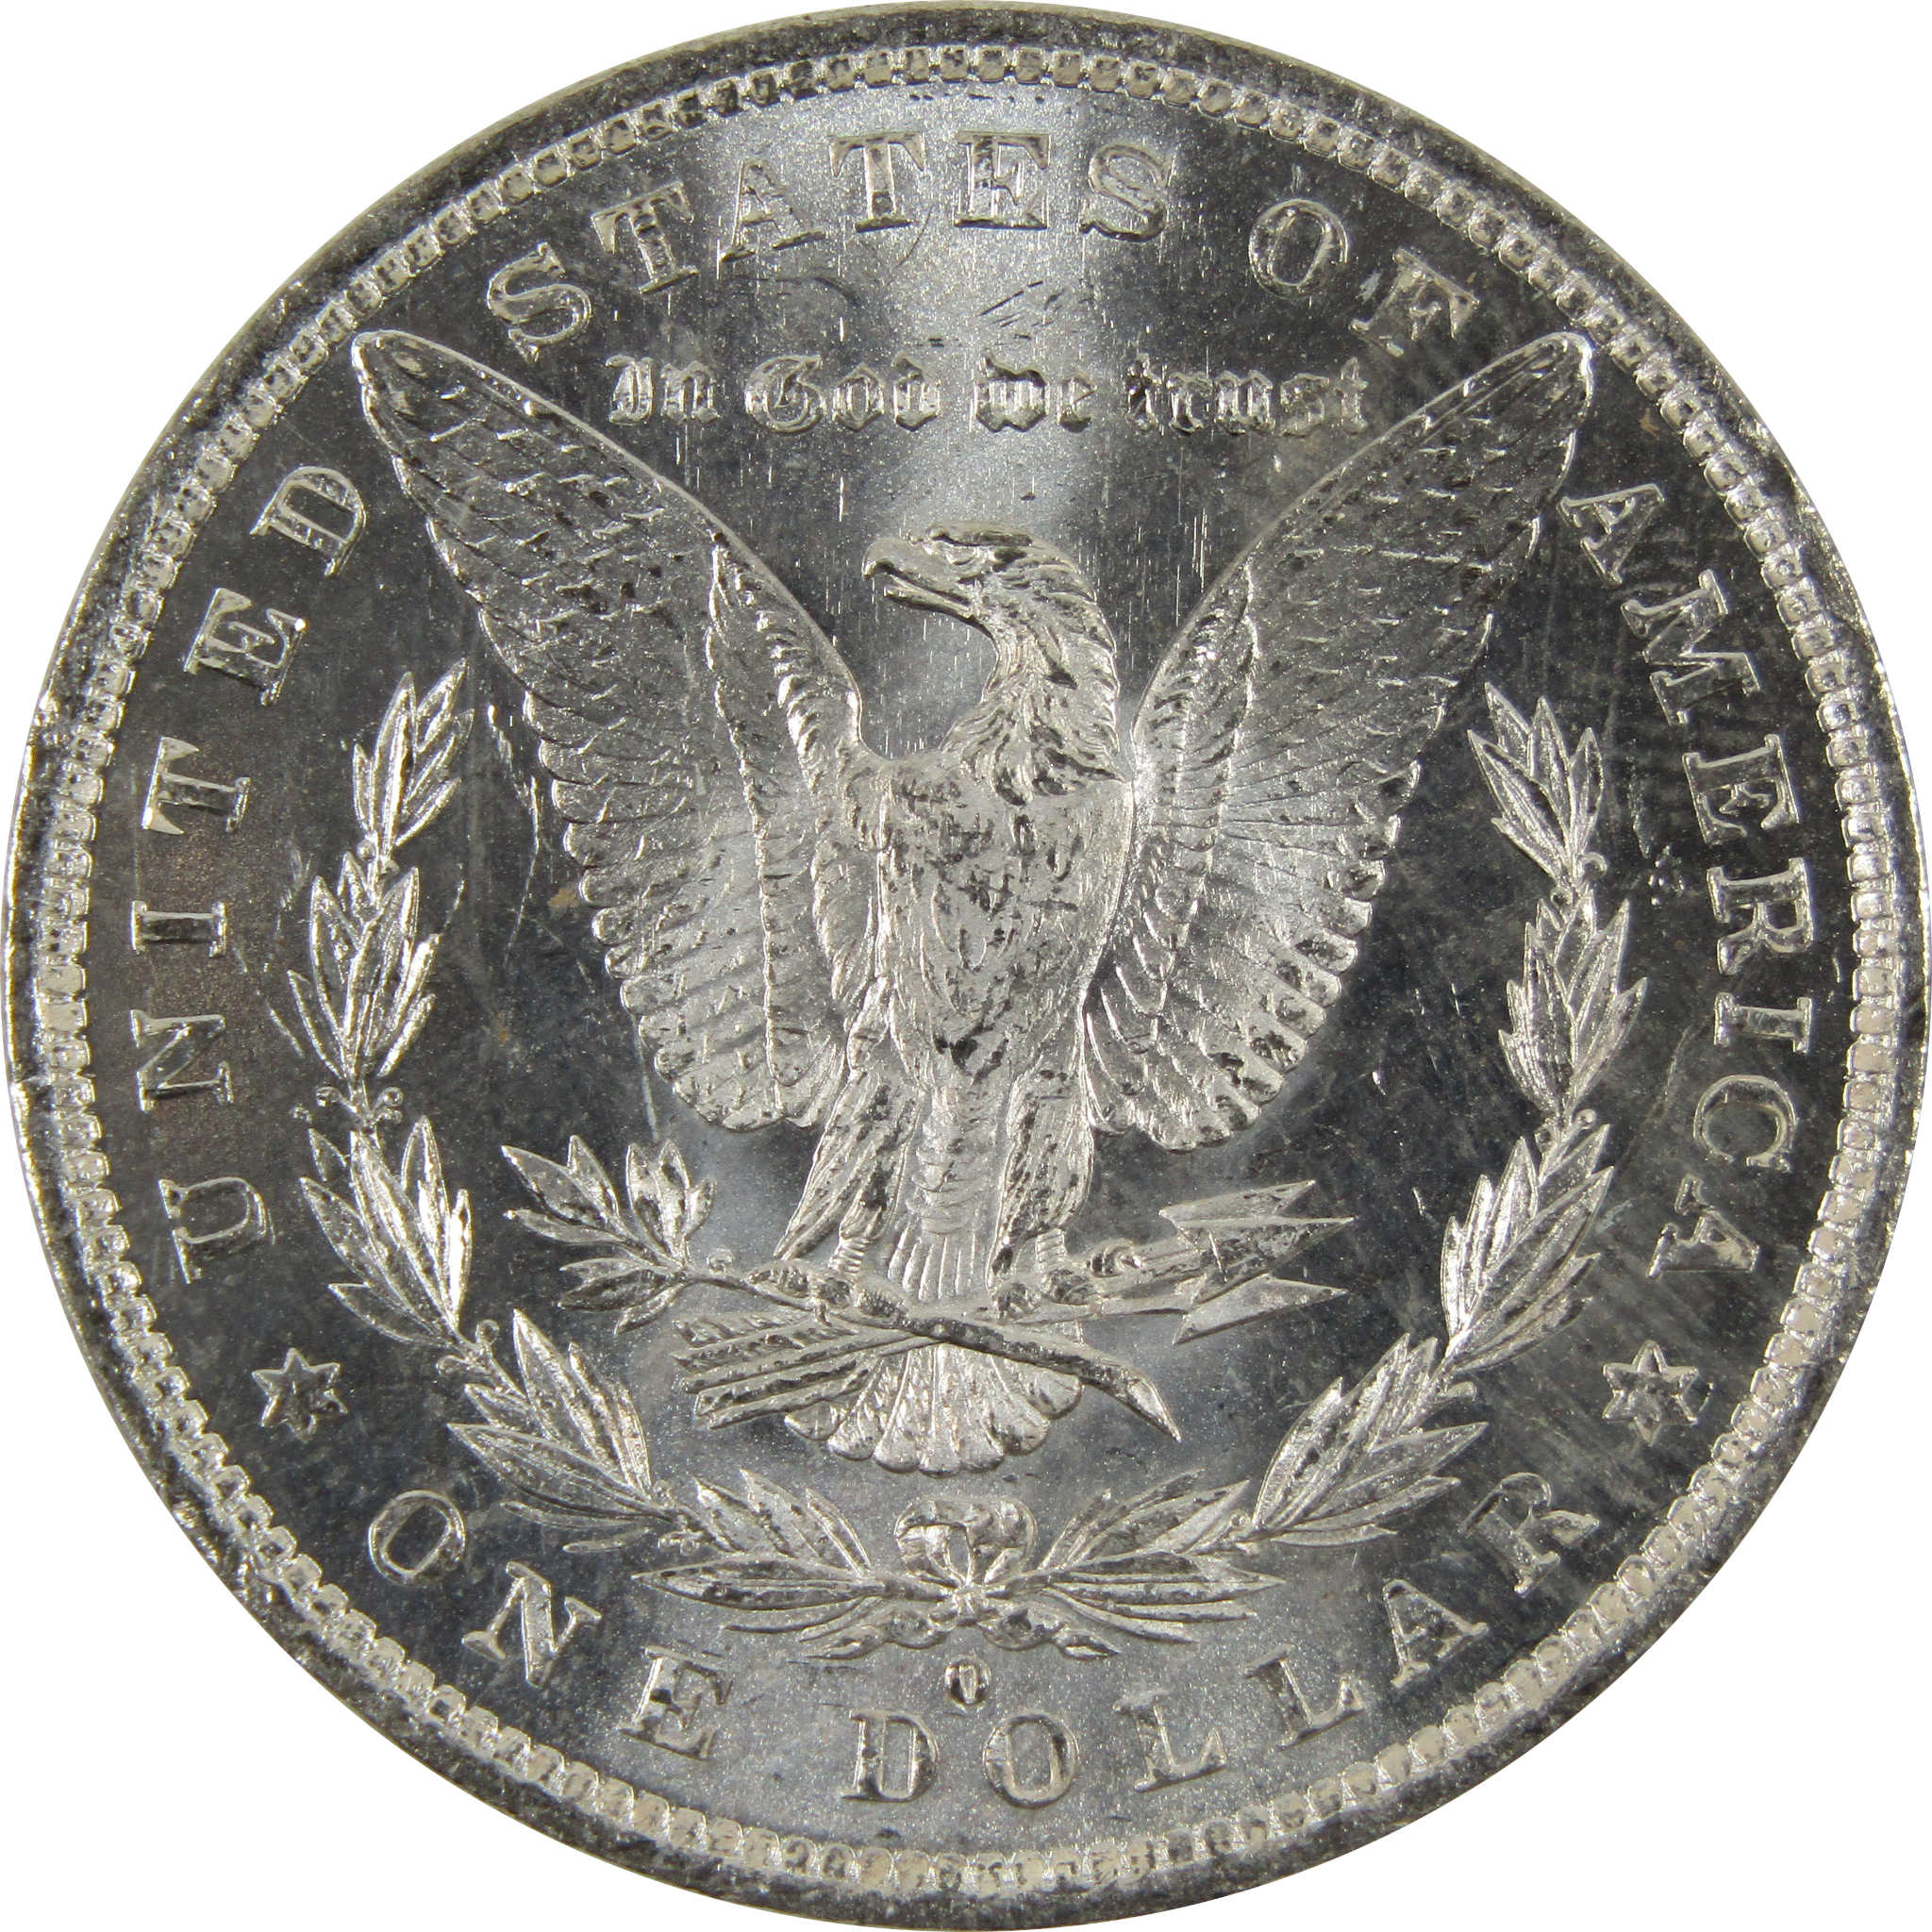 1882 O/O Morgan Dollar AU About Uncirculated 90% Silver $1 SKU:I8885 - Morgan coin - Morgan silver dollar - Morgan silver dollar for sale - Profile Coins &amp; Collectibles